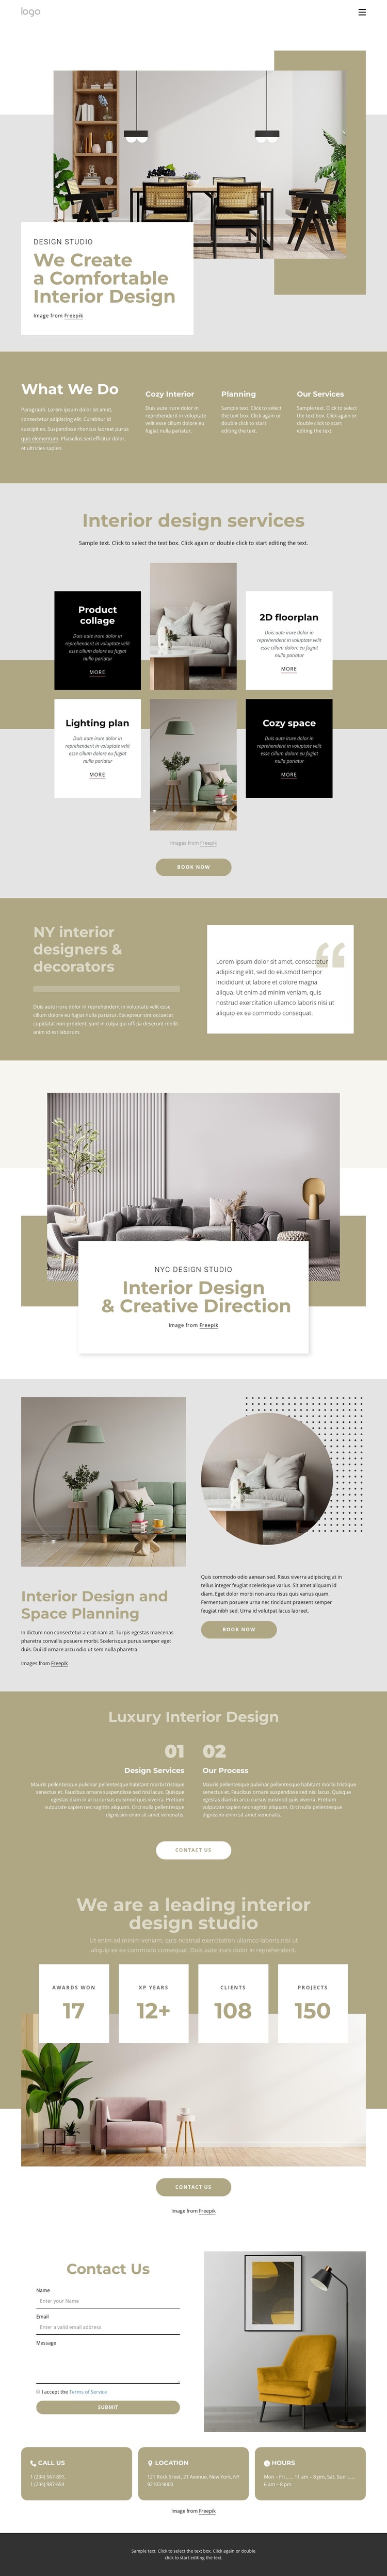 We create a comfortable interiors HTML5 Template